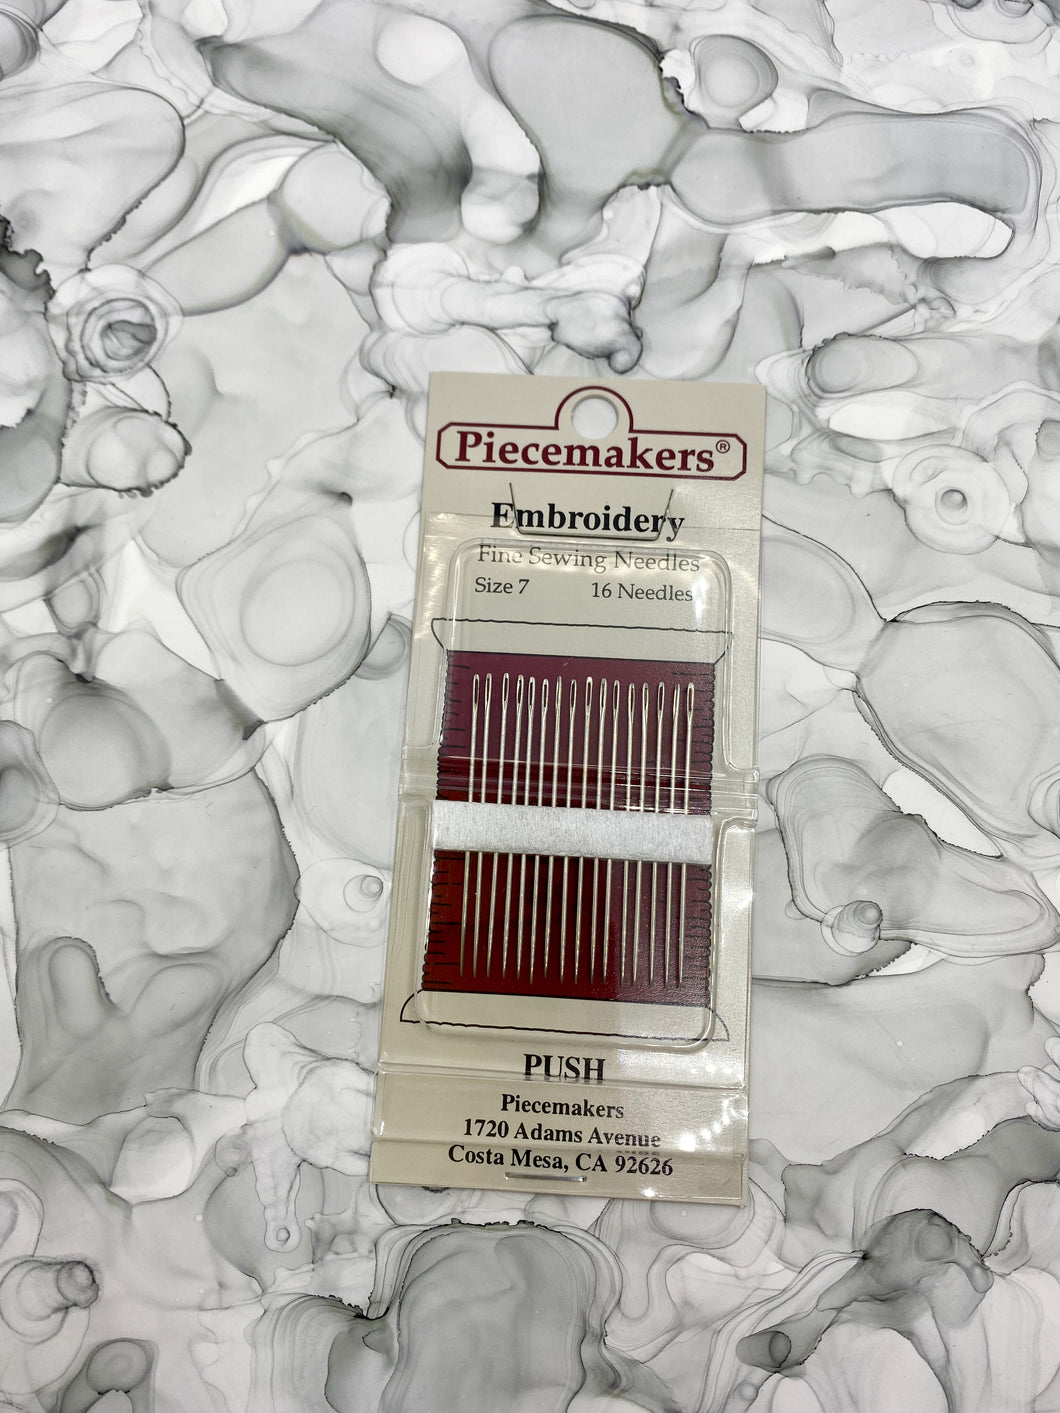 Piecemakers Embroidery Needles, Size 7